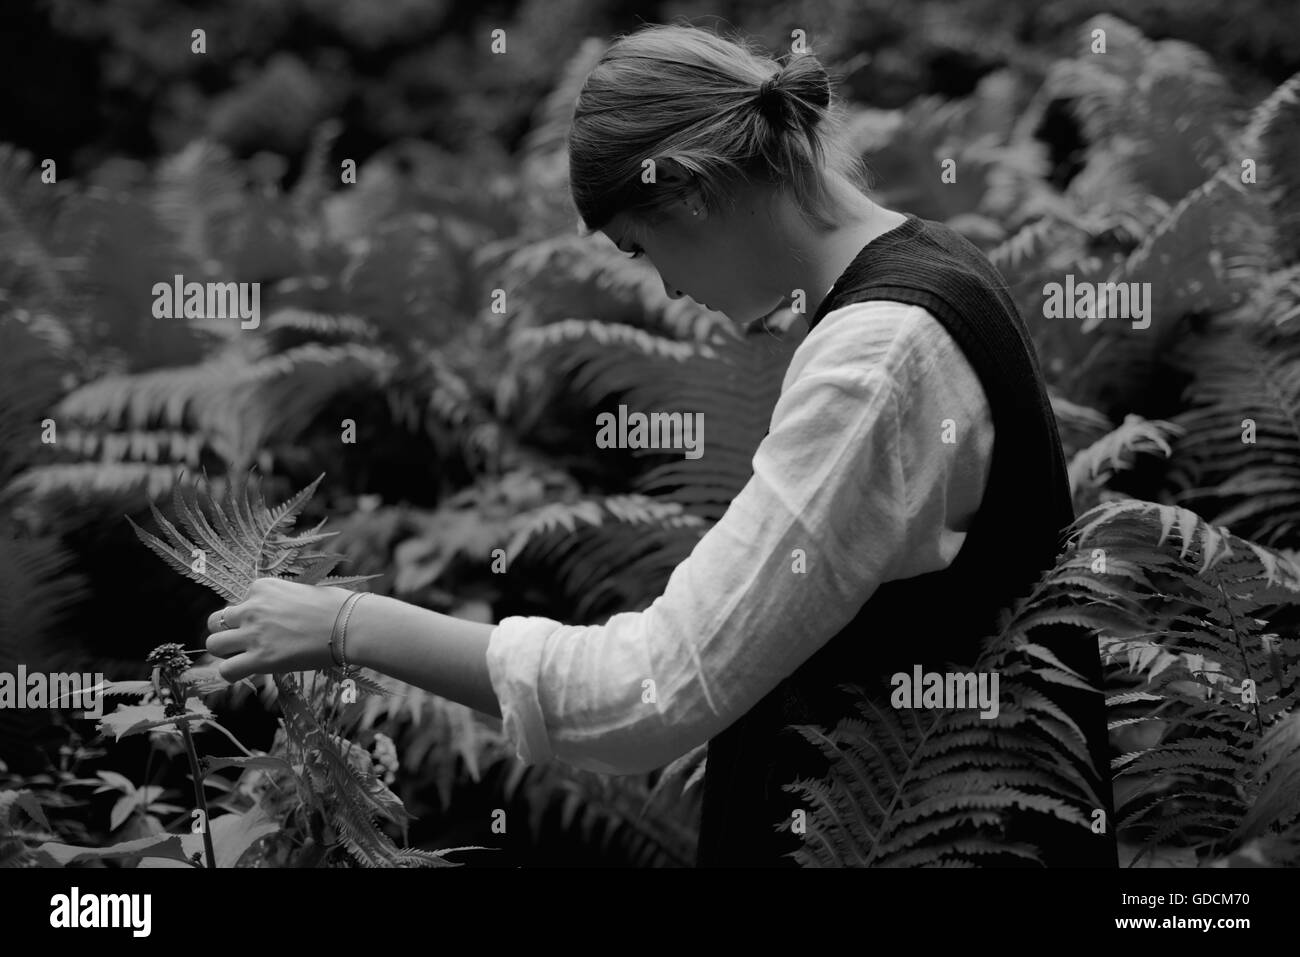 Vithe back of teenage girl walking through forest fern leaves, black and white. Stock Photo